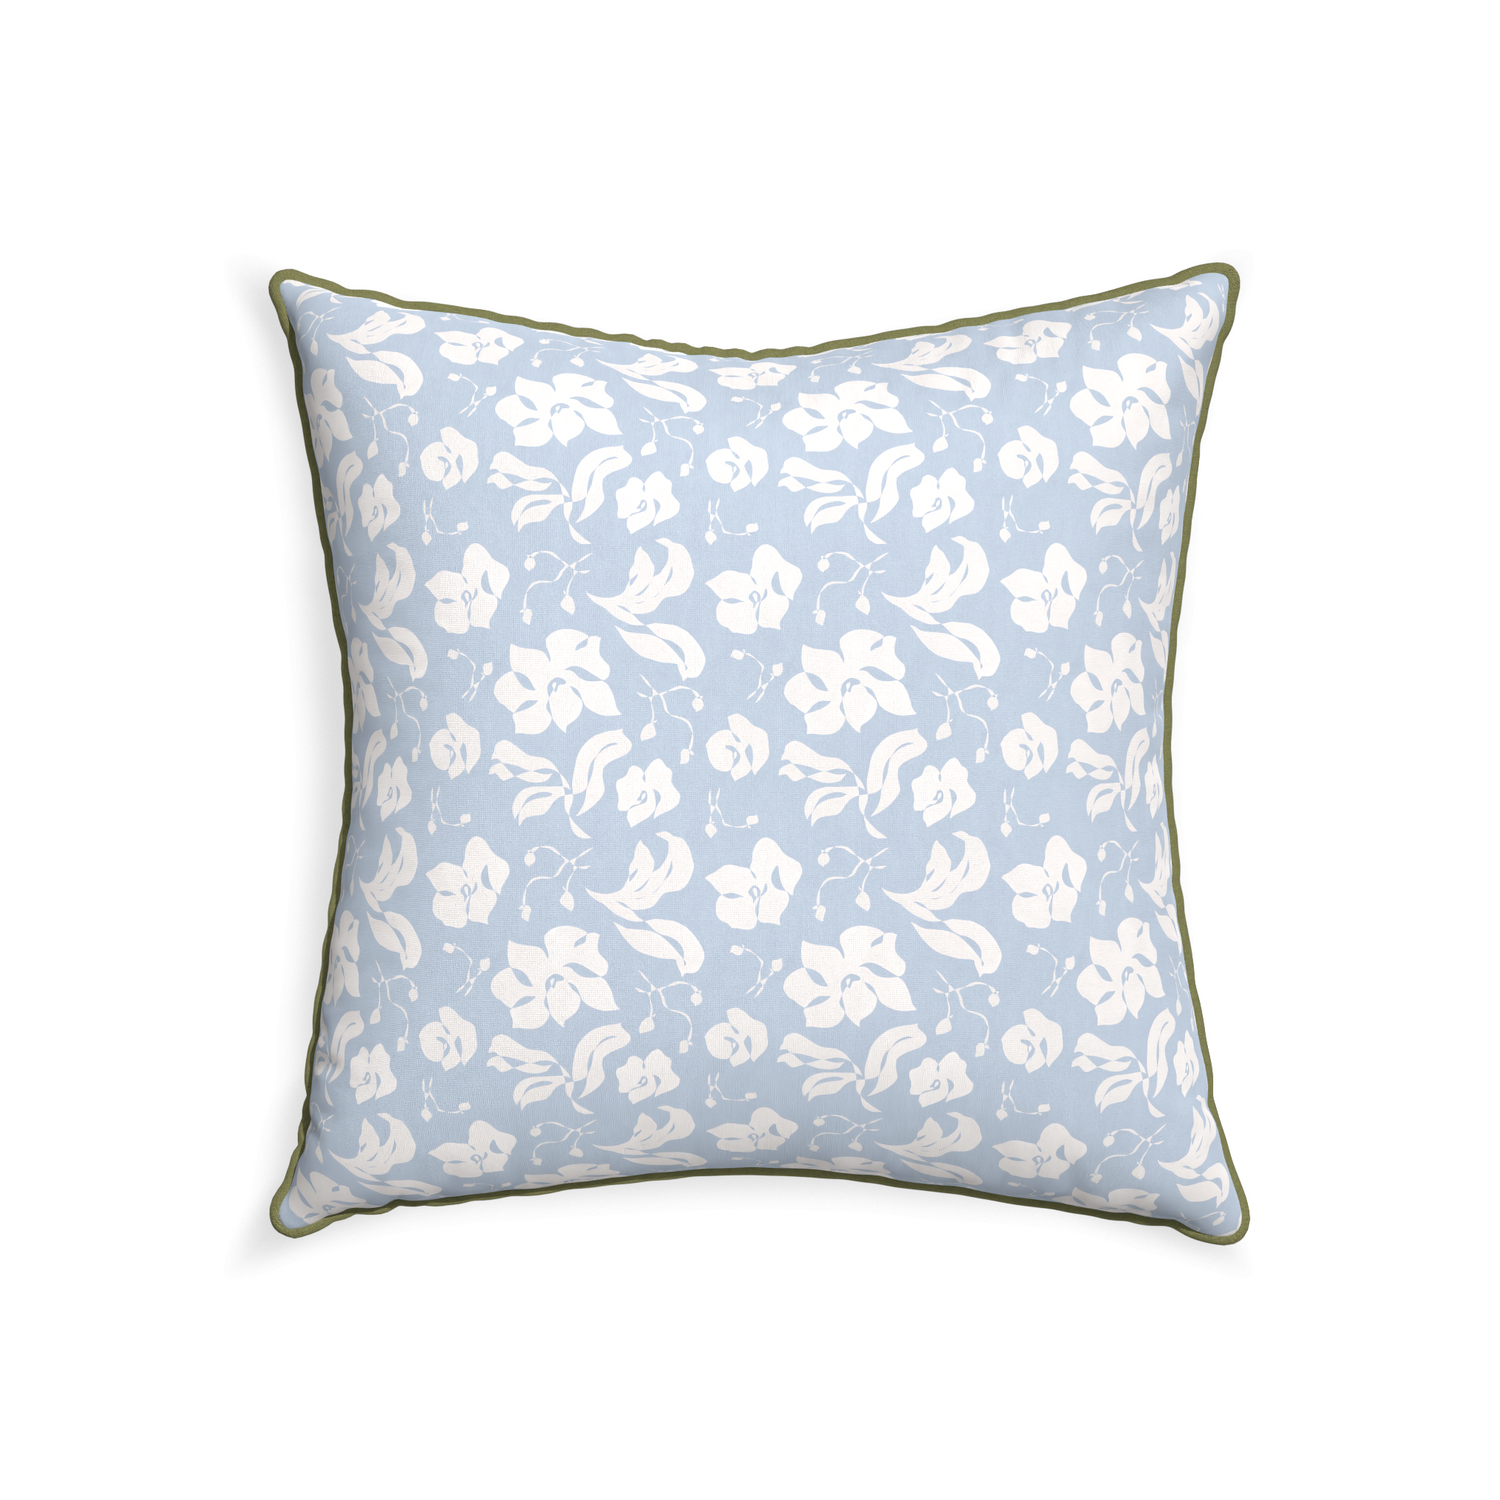 square cornflower blue floral pillow with moss green piping